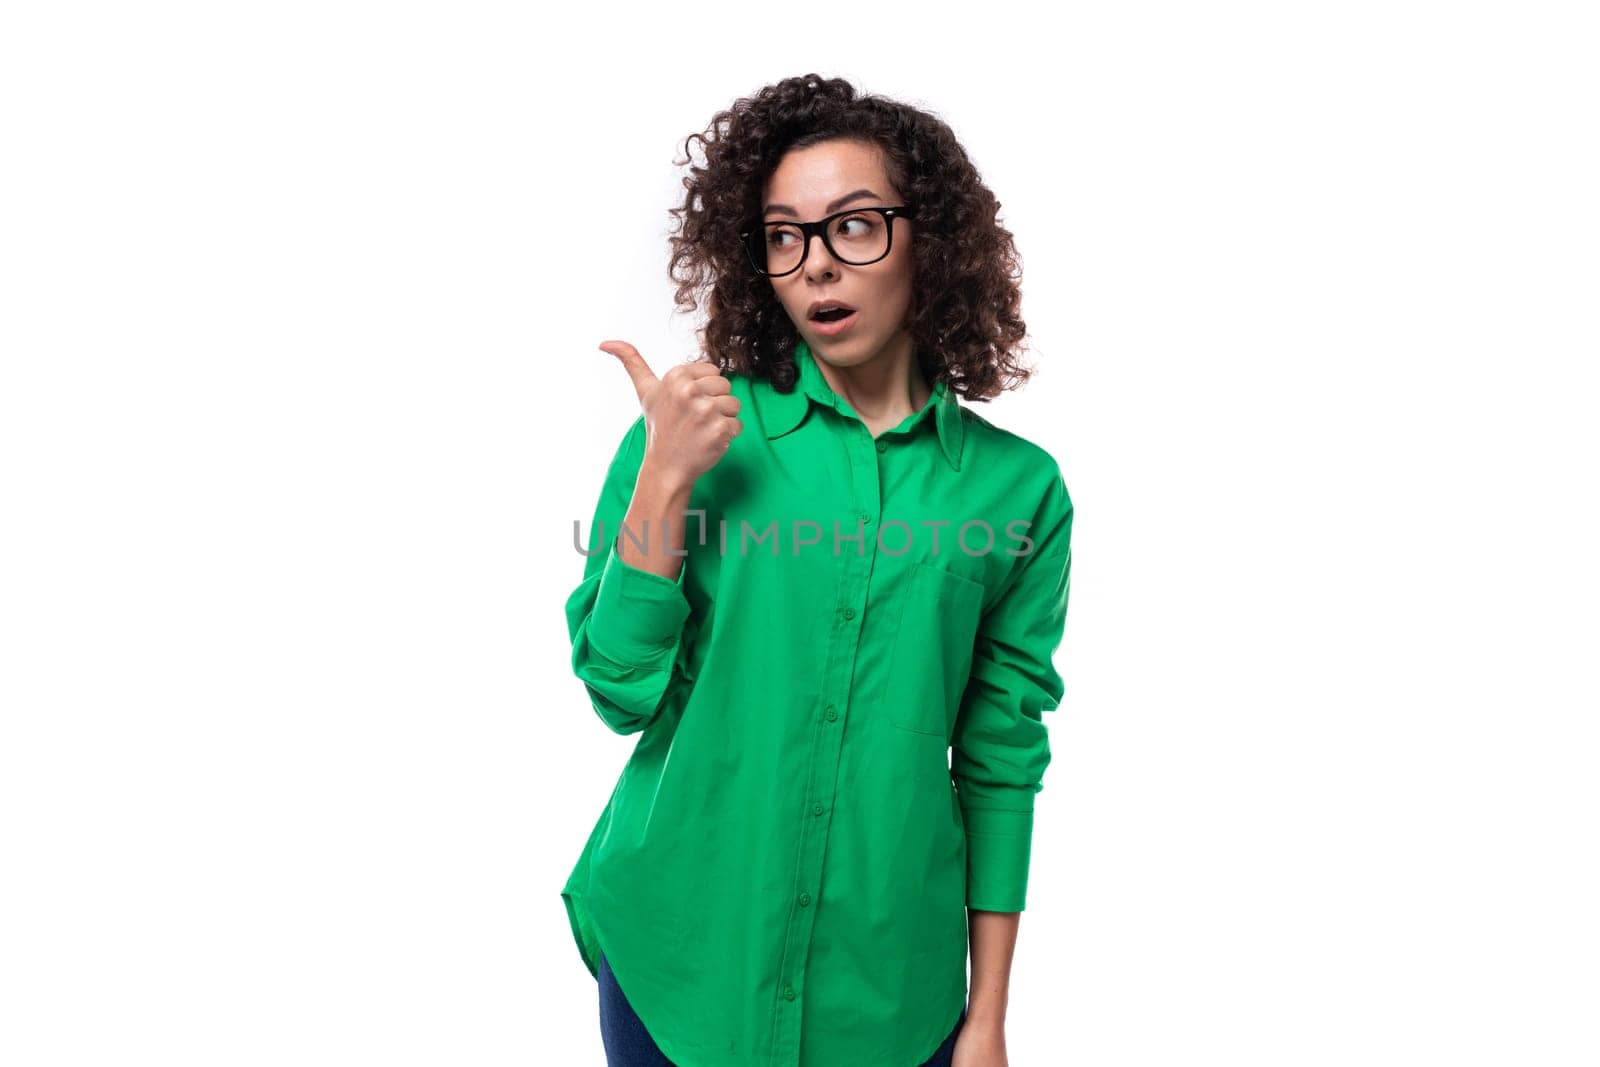 portrait of a brunette young caucasian lady with curly hair dressed in a green shirt.